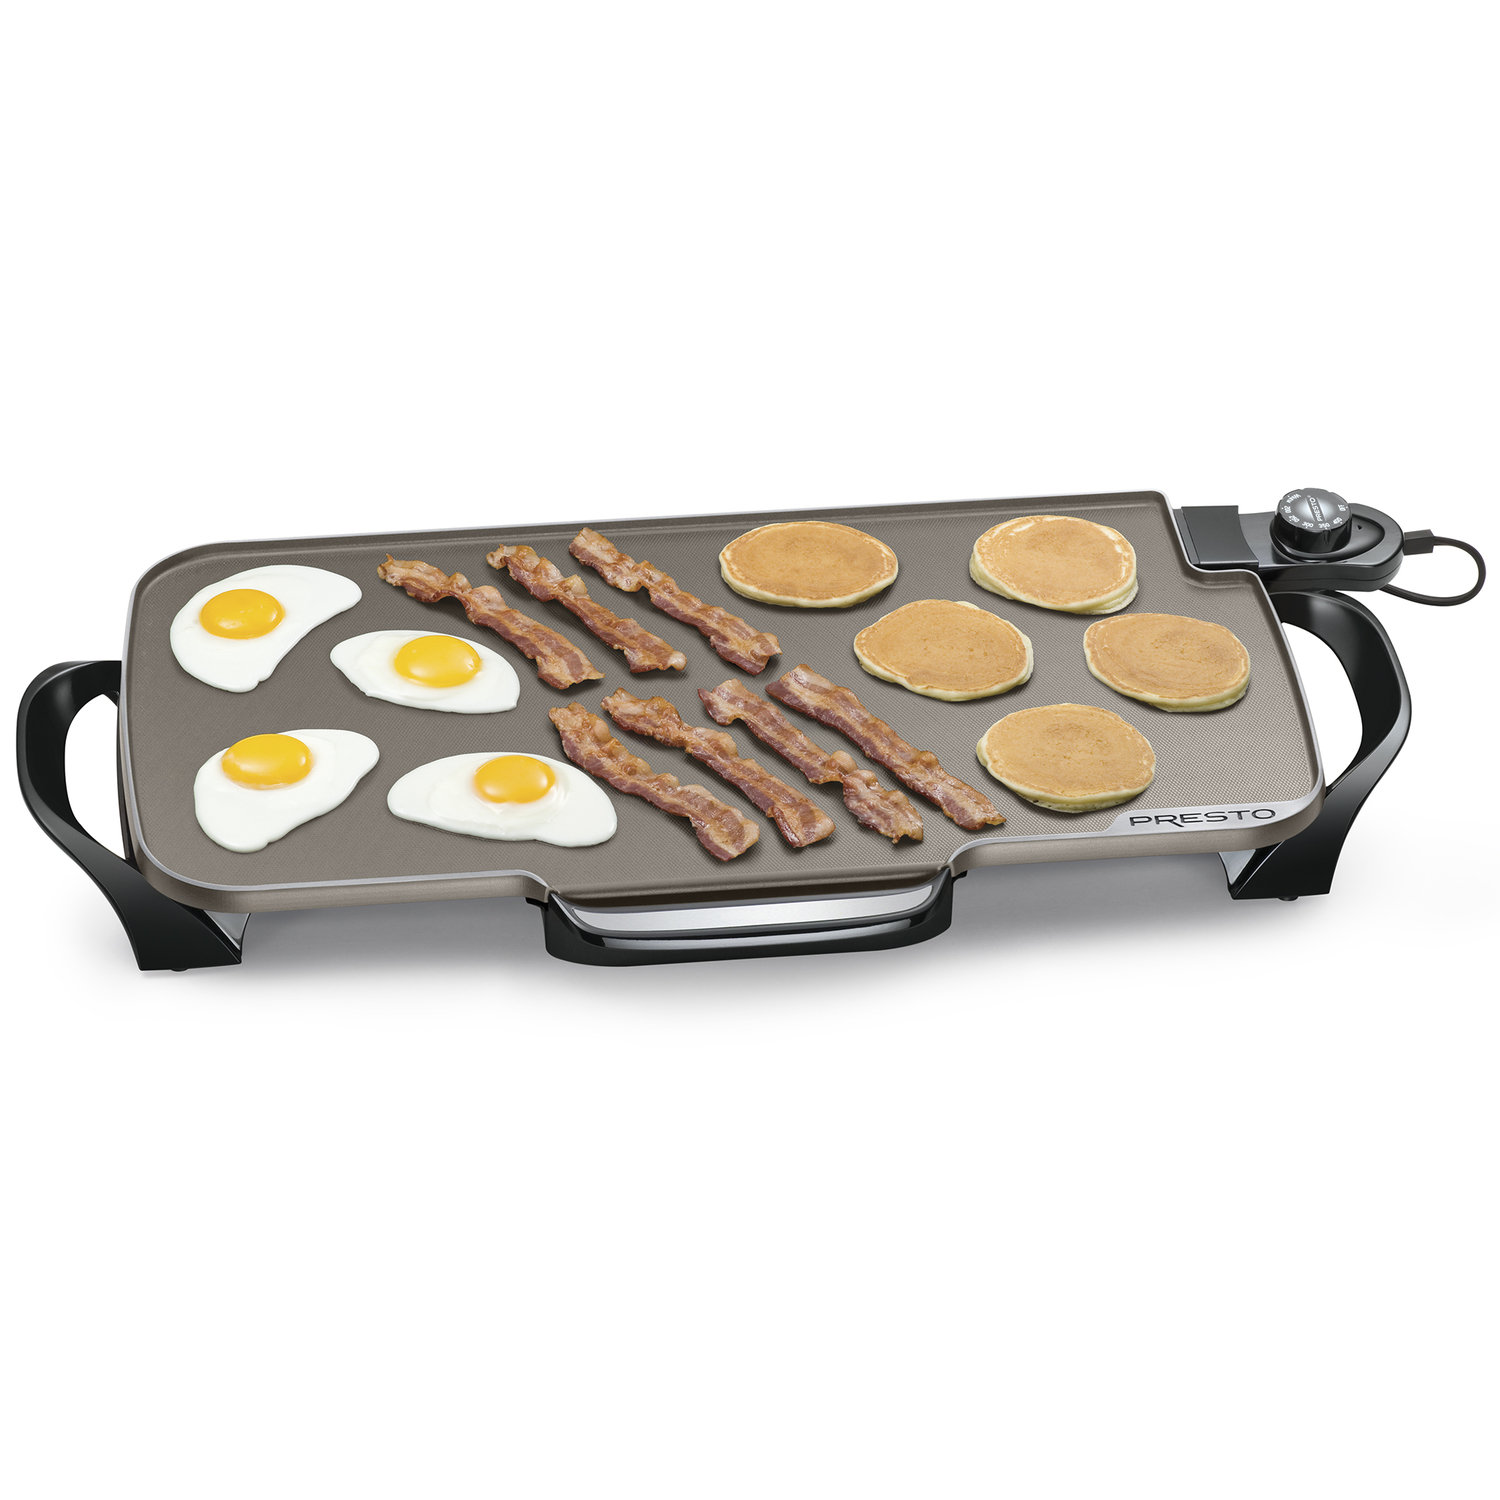 KENMORE Kenmore Non-Stick Electric Griddle with Removable Drip